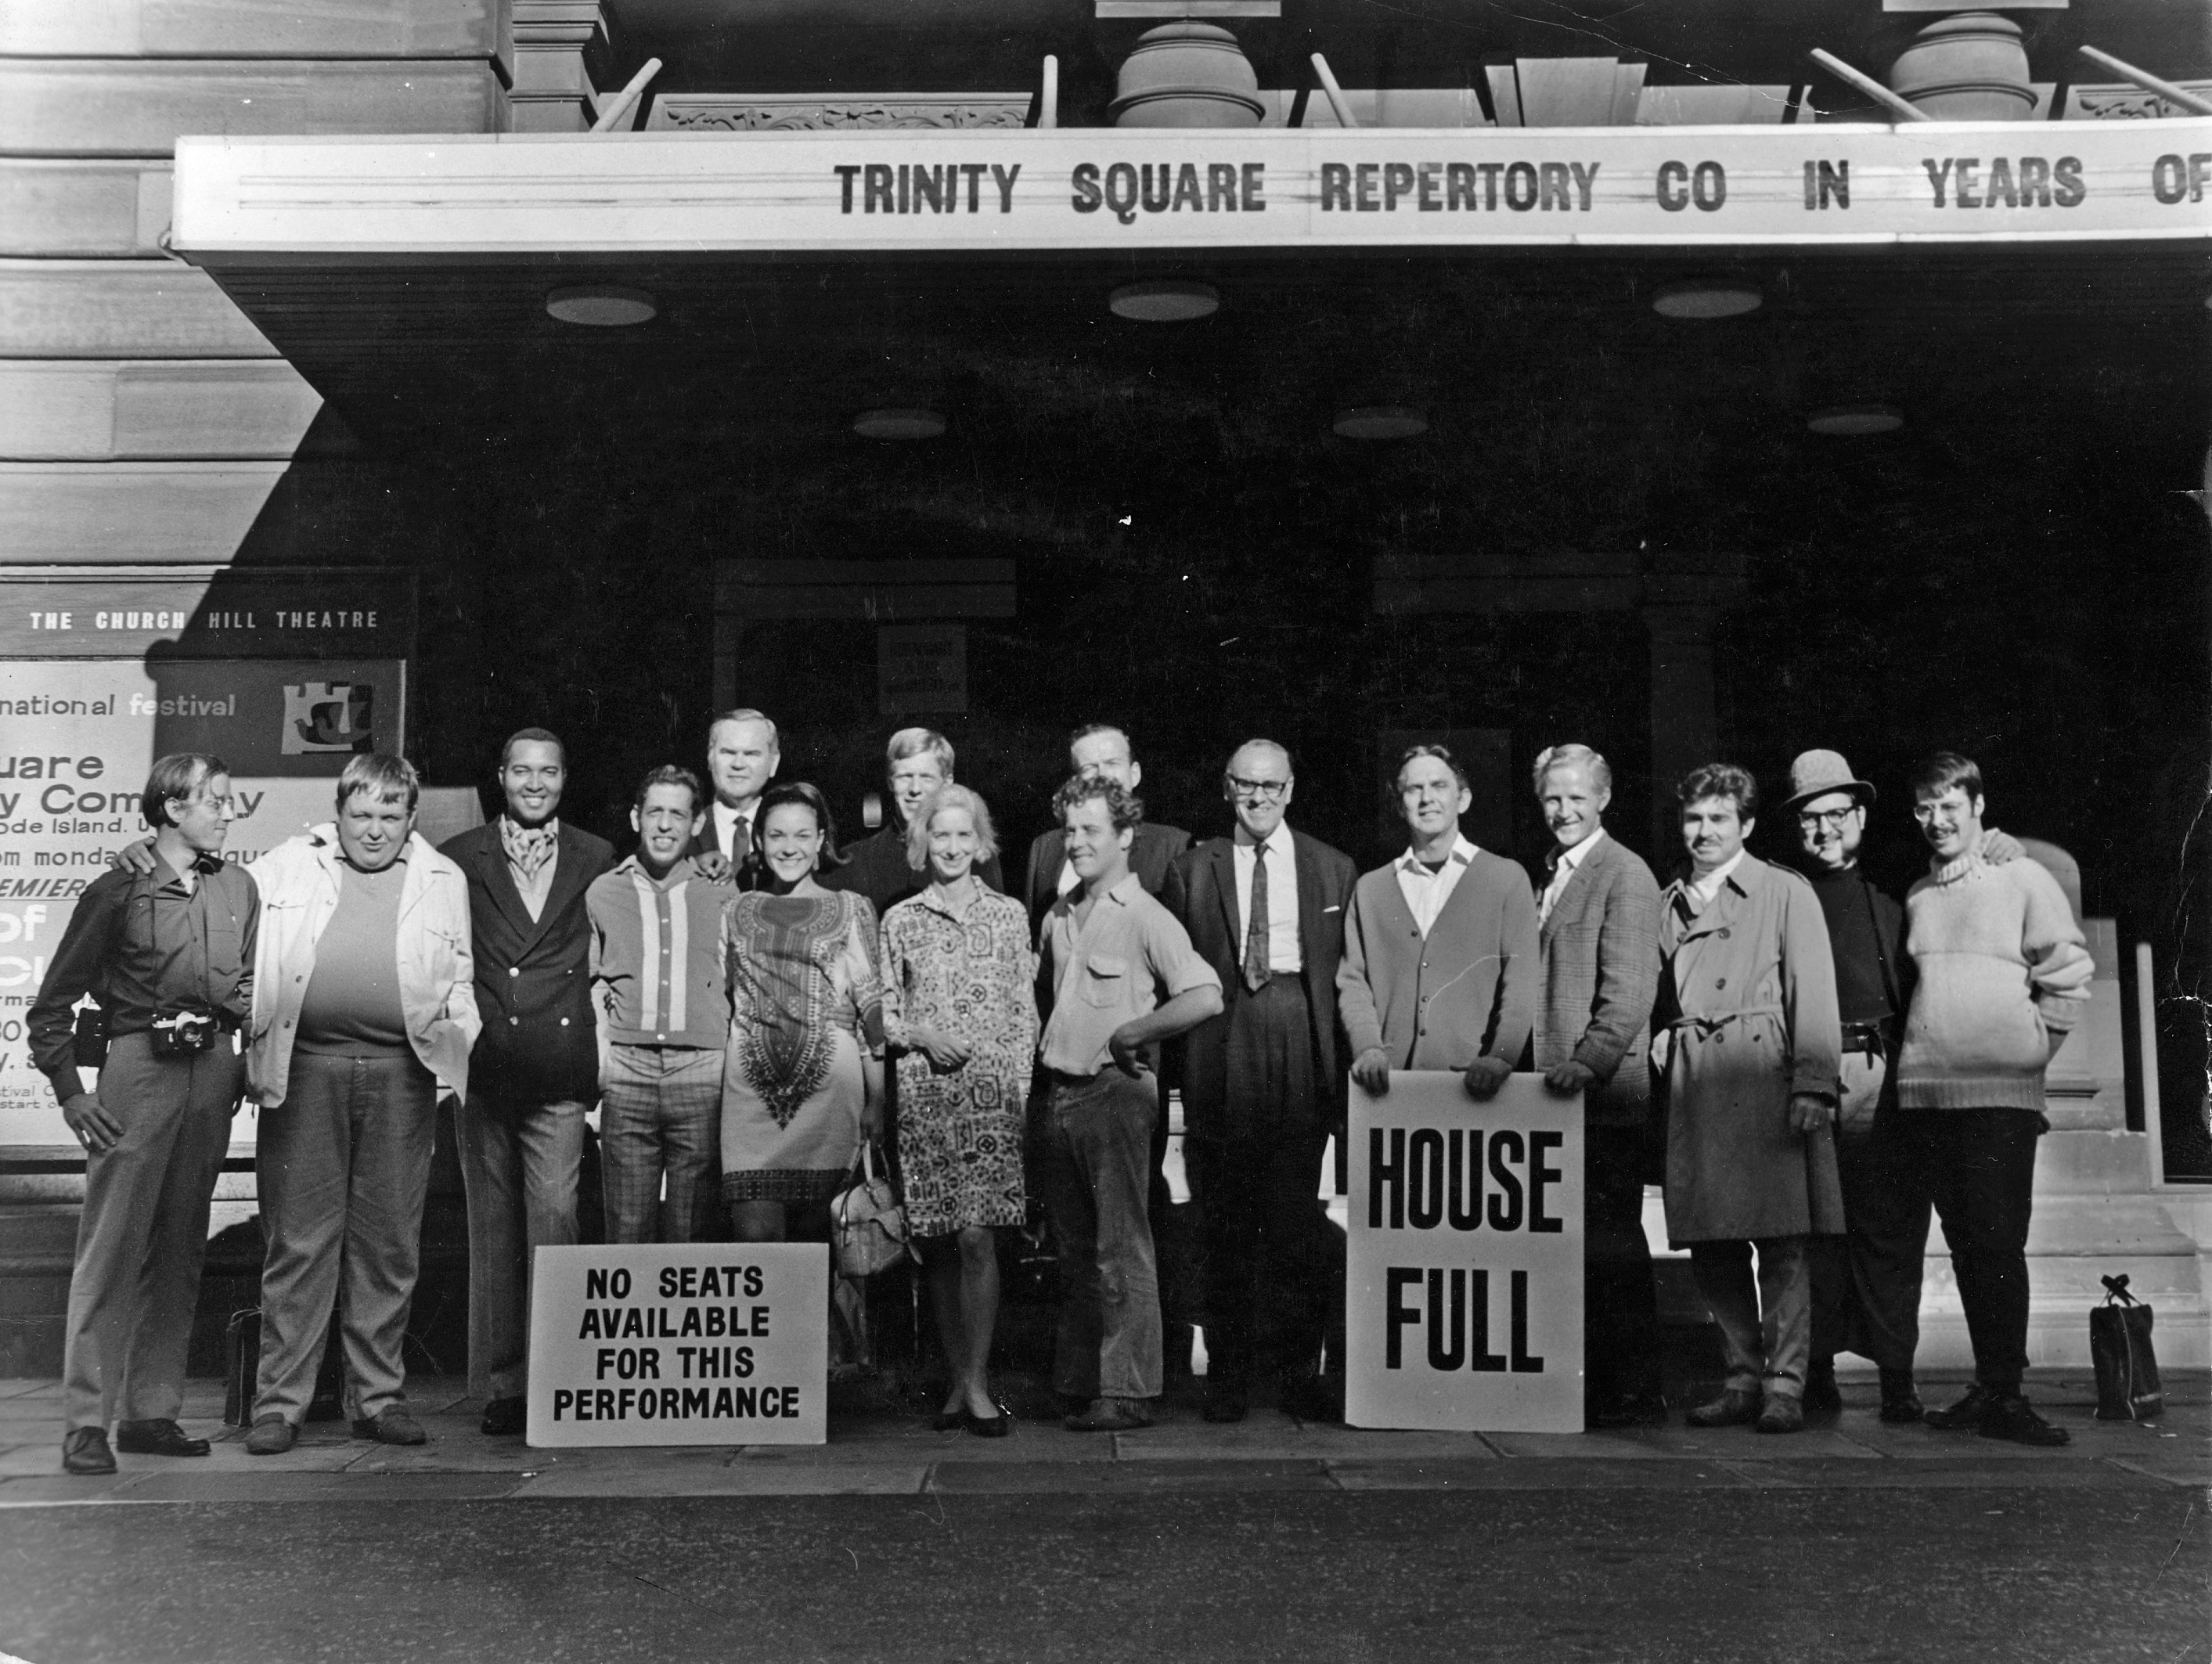 Members of the Trinity Repertory Company in Edinburgh, Scotland. The Providence arts community is mourning the loss of local theater giants Adrian Hall and Eugene Lee, who passed away this week just days apart. 